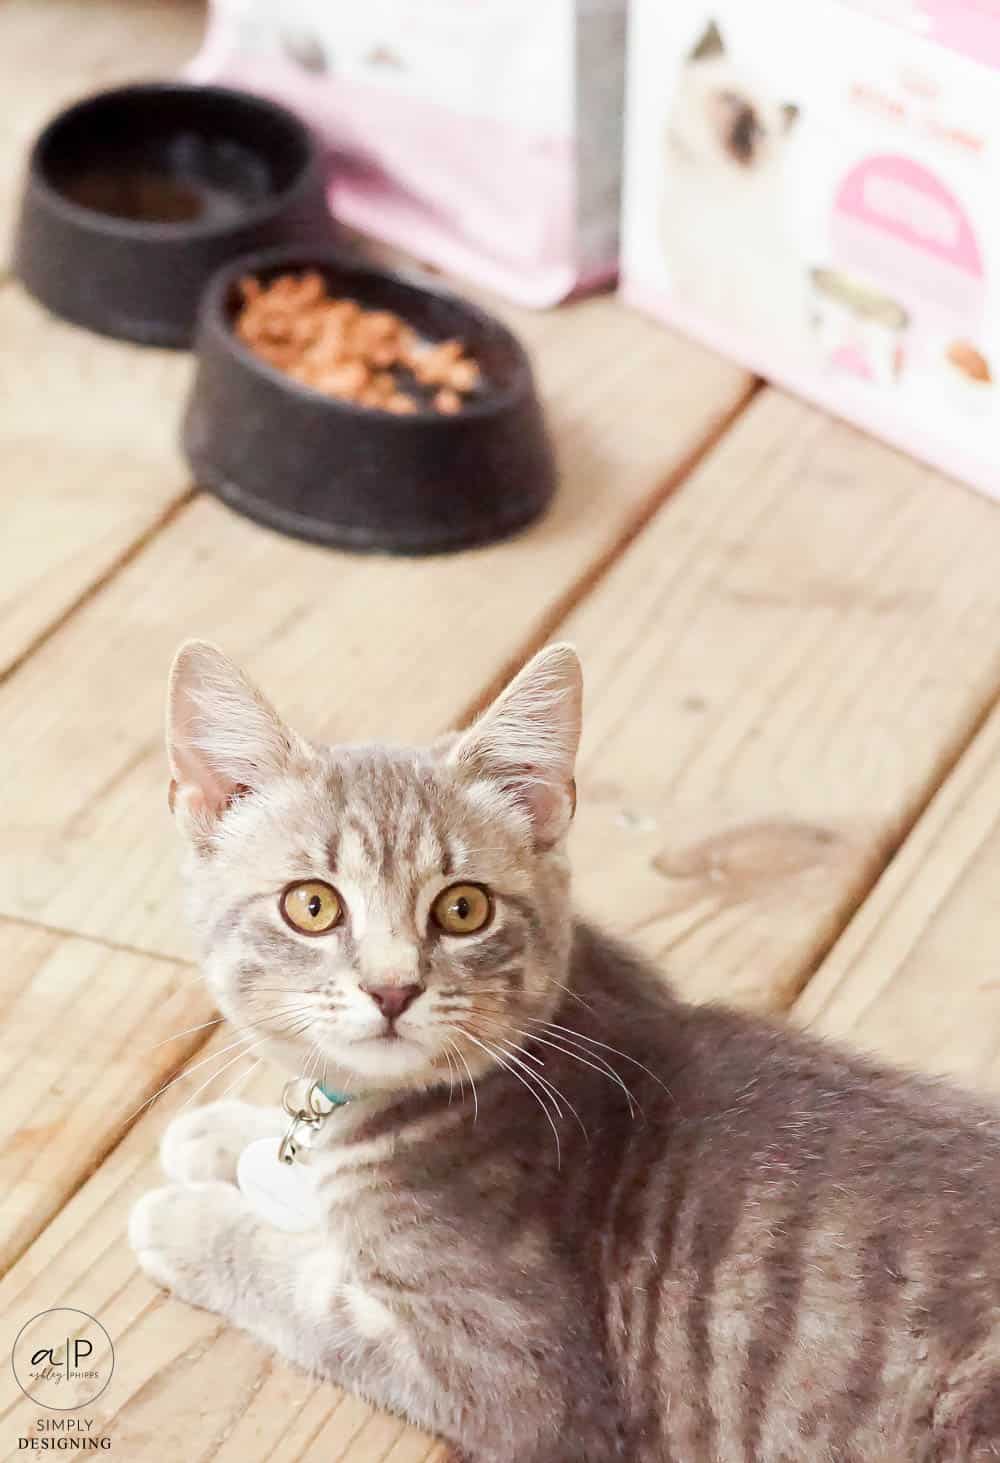 cat looking up at camera with food in the background